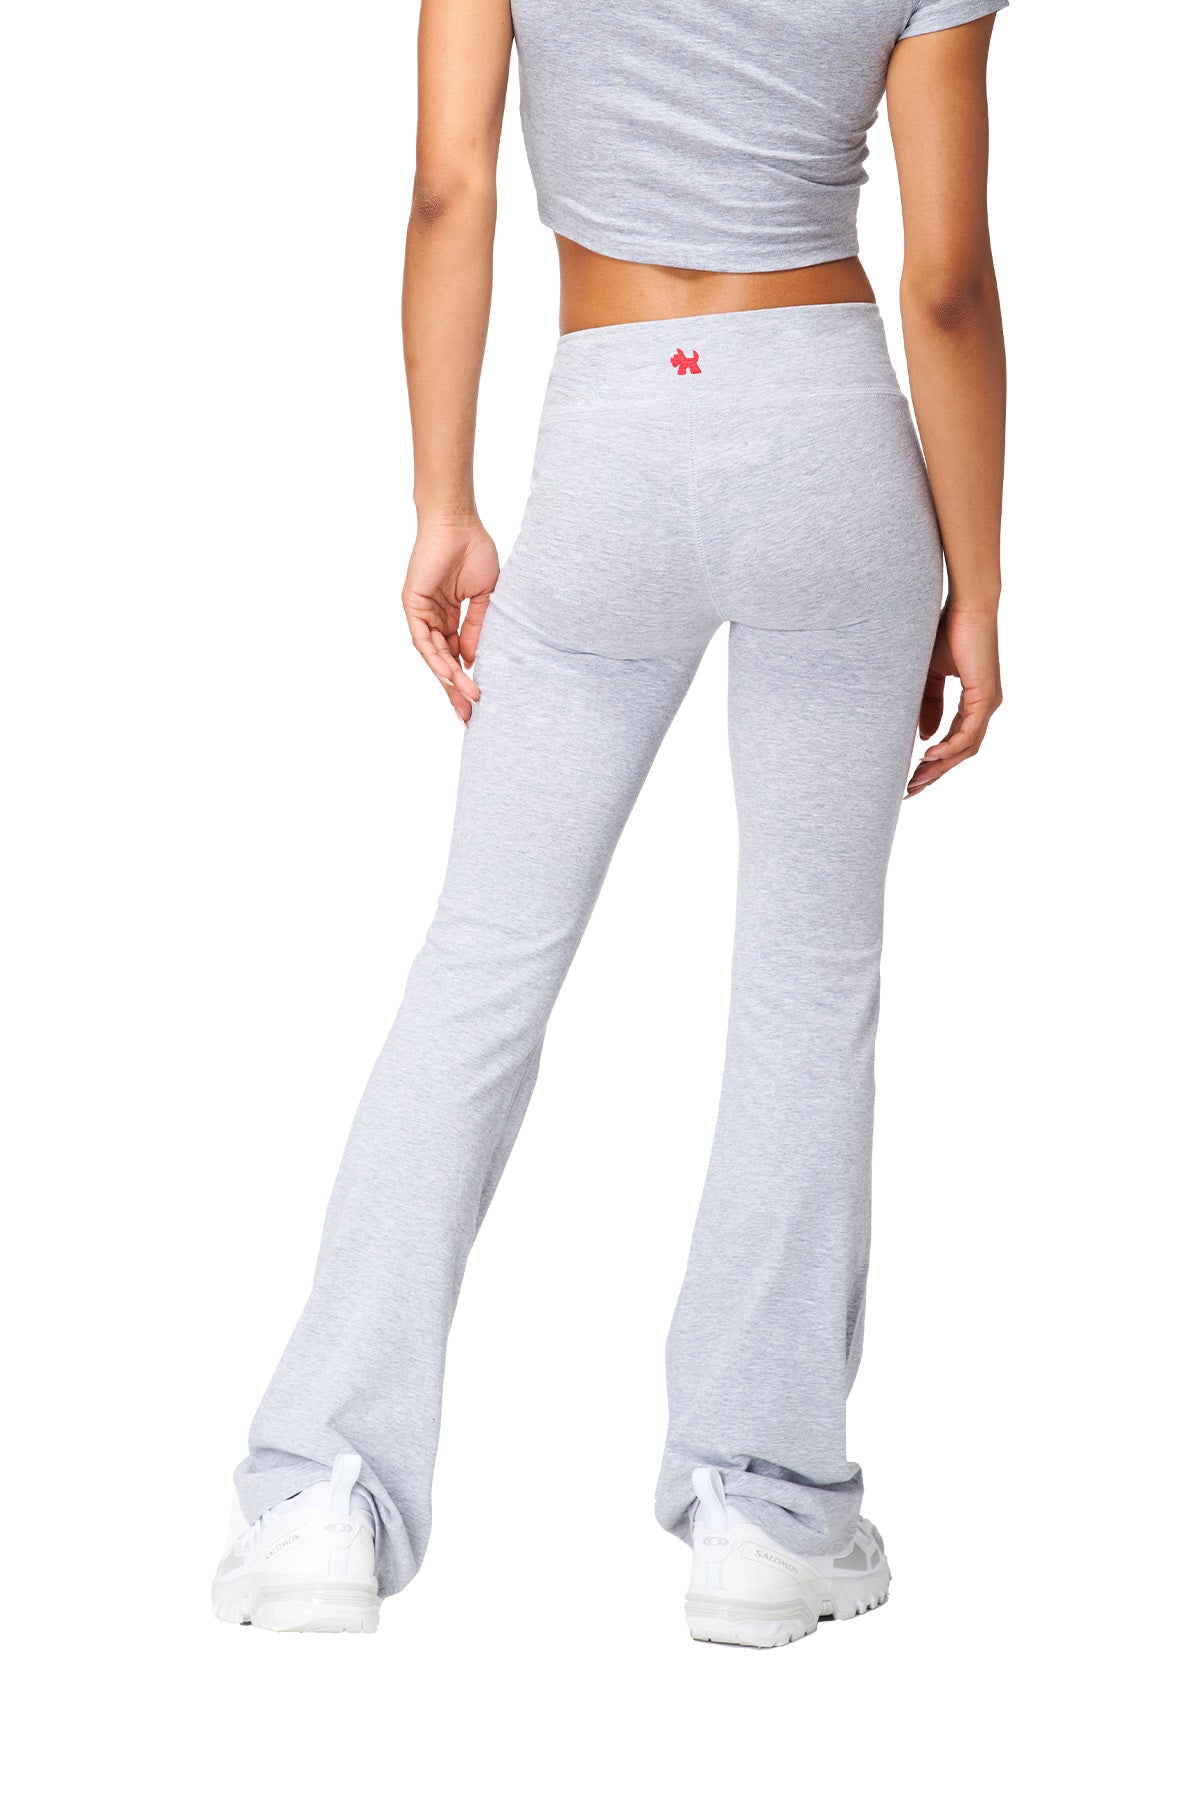 Tiana - Flared Pant with 3 Band